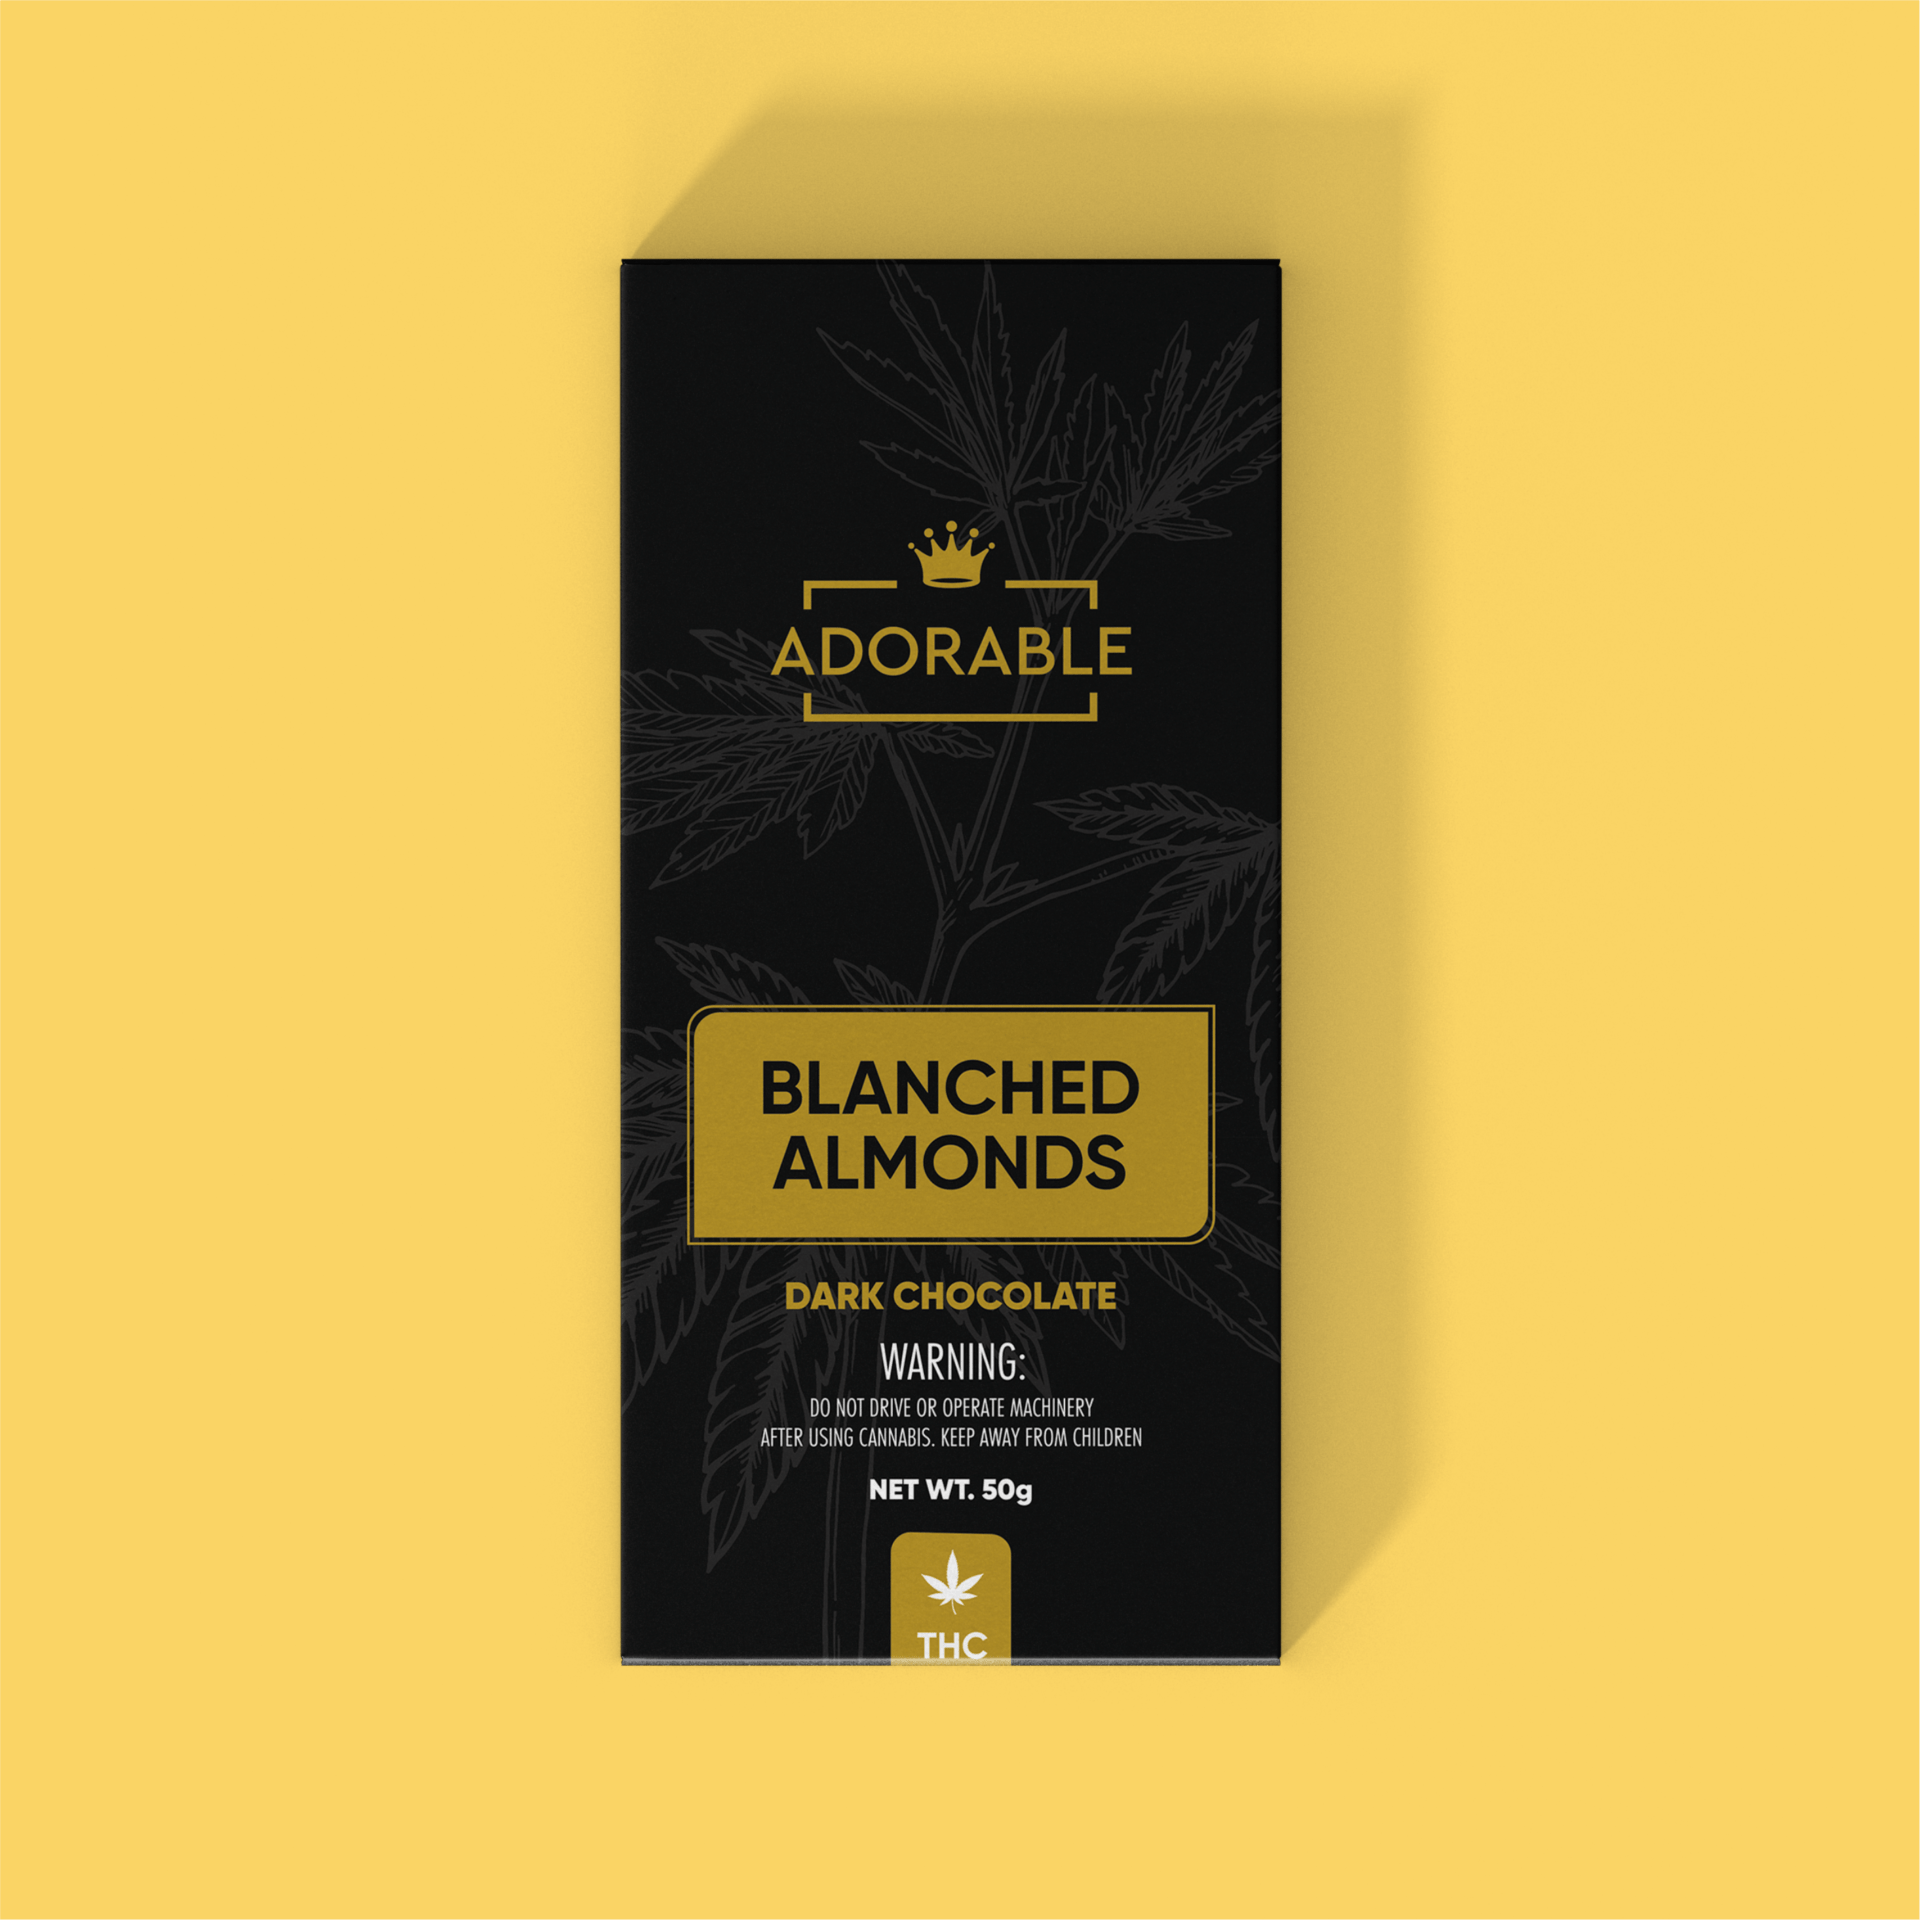 Adorable - Blanched Almonds - Dark Chocolate